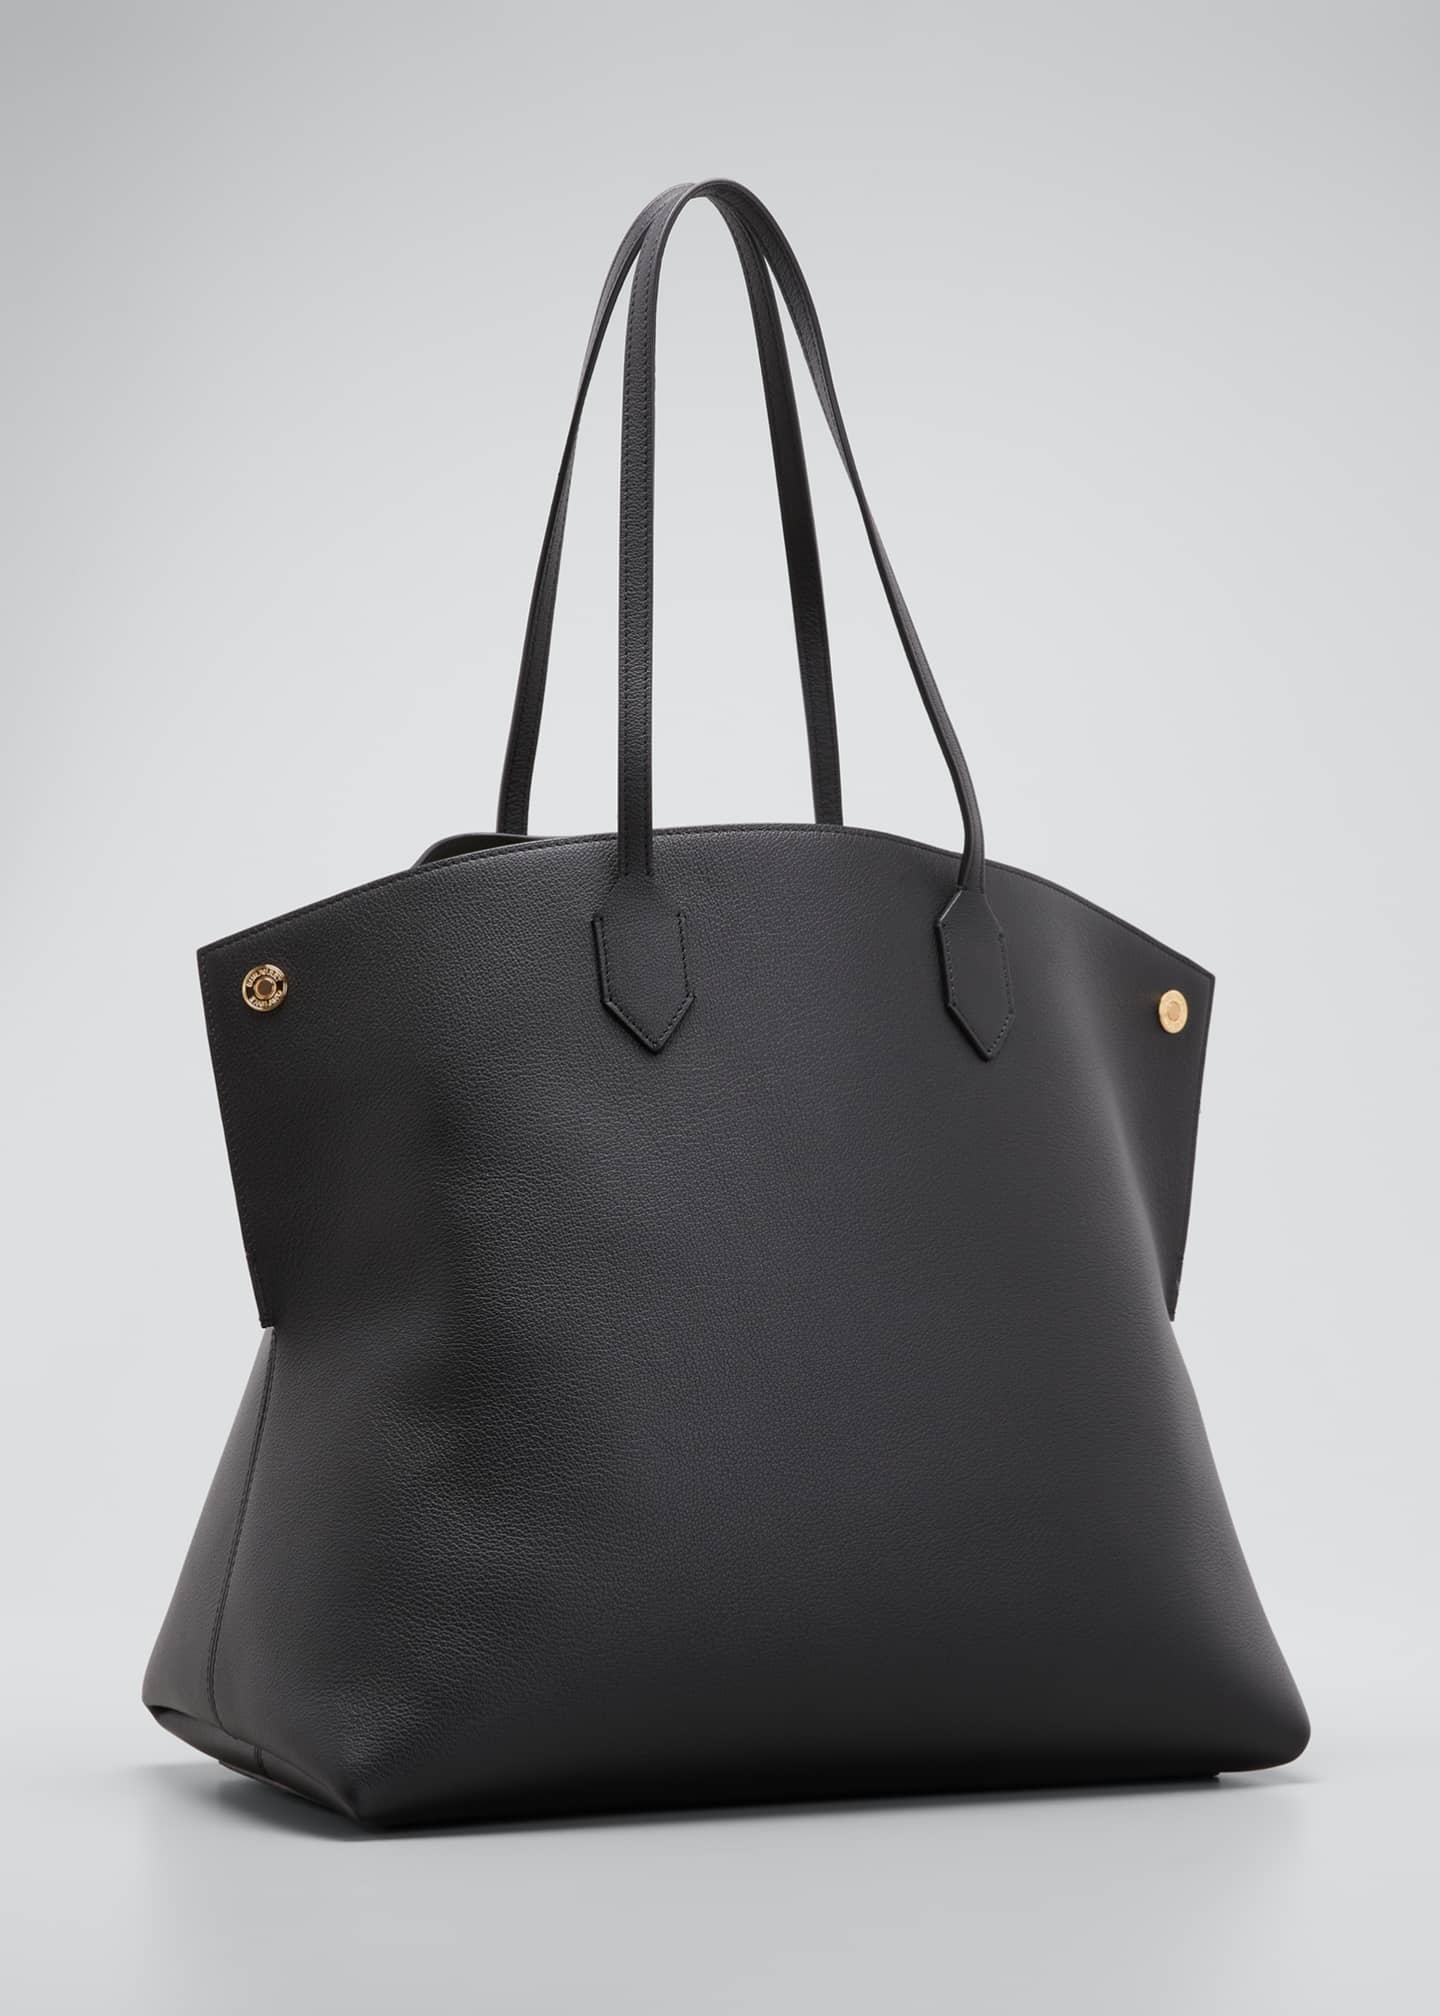 Burberry Society Leather Tote Bag - Bergdorf Goodman